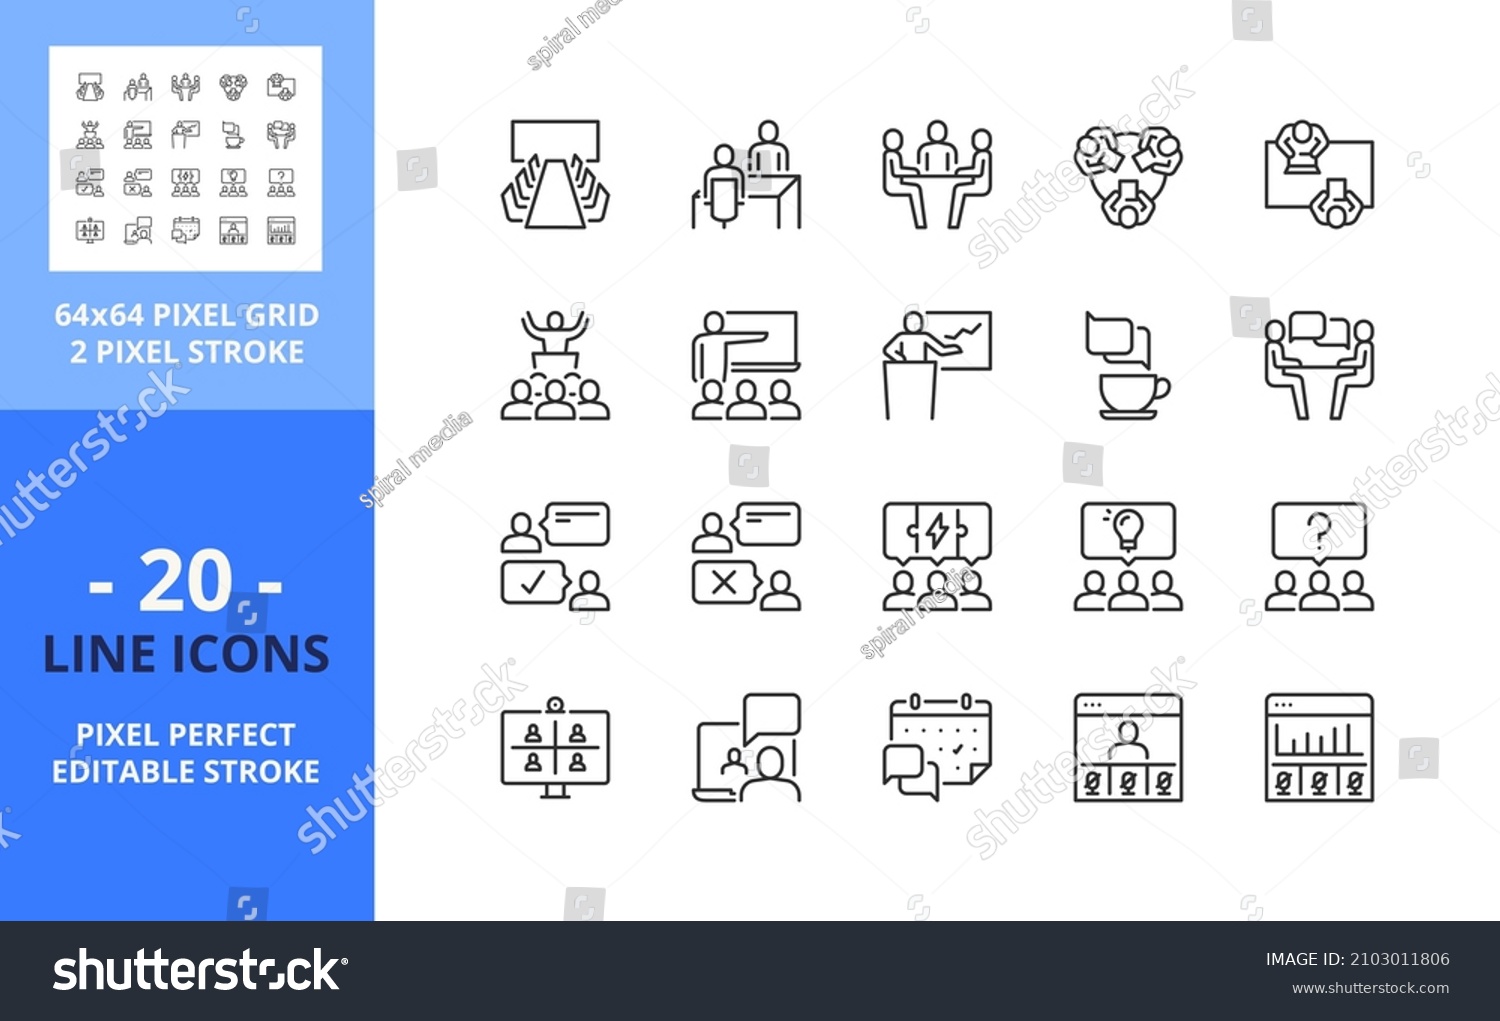 SVG of Line icons about meeting. Business concept. Contains such icons as conference, interview, presentation, webinar, teamwork and coworking. Editable stroke. Vector - 64 pixel perfect grid svg